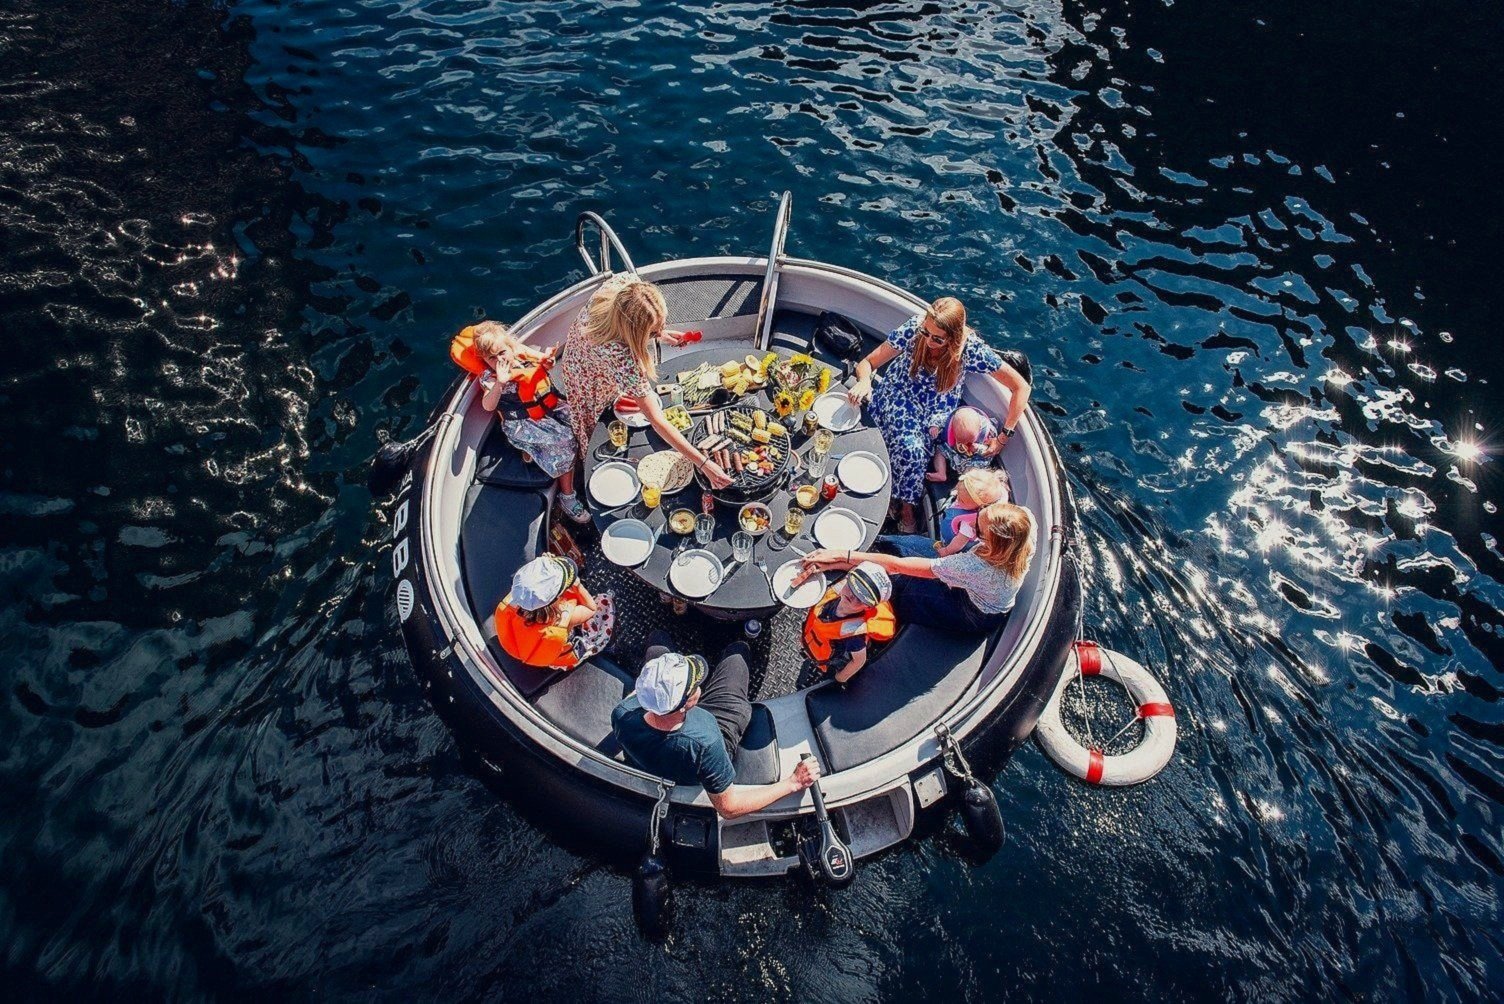 a grill boat on the river thames with nine people on it